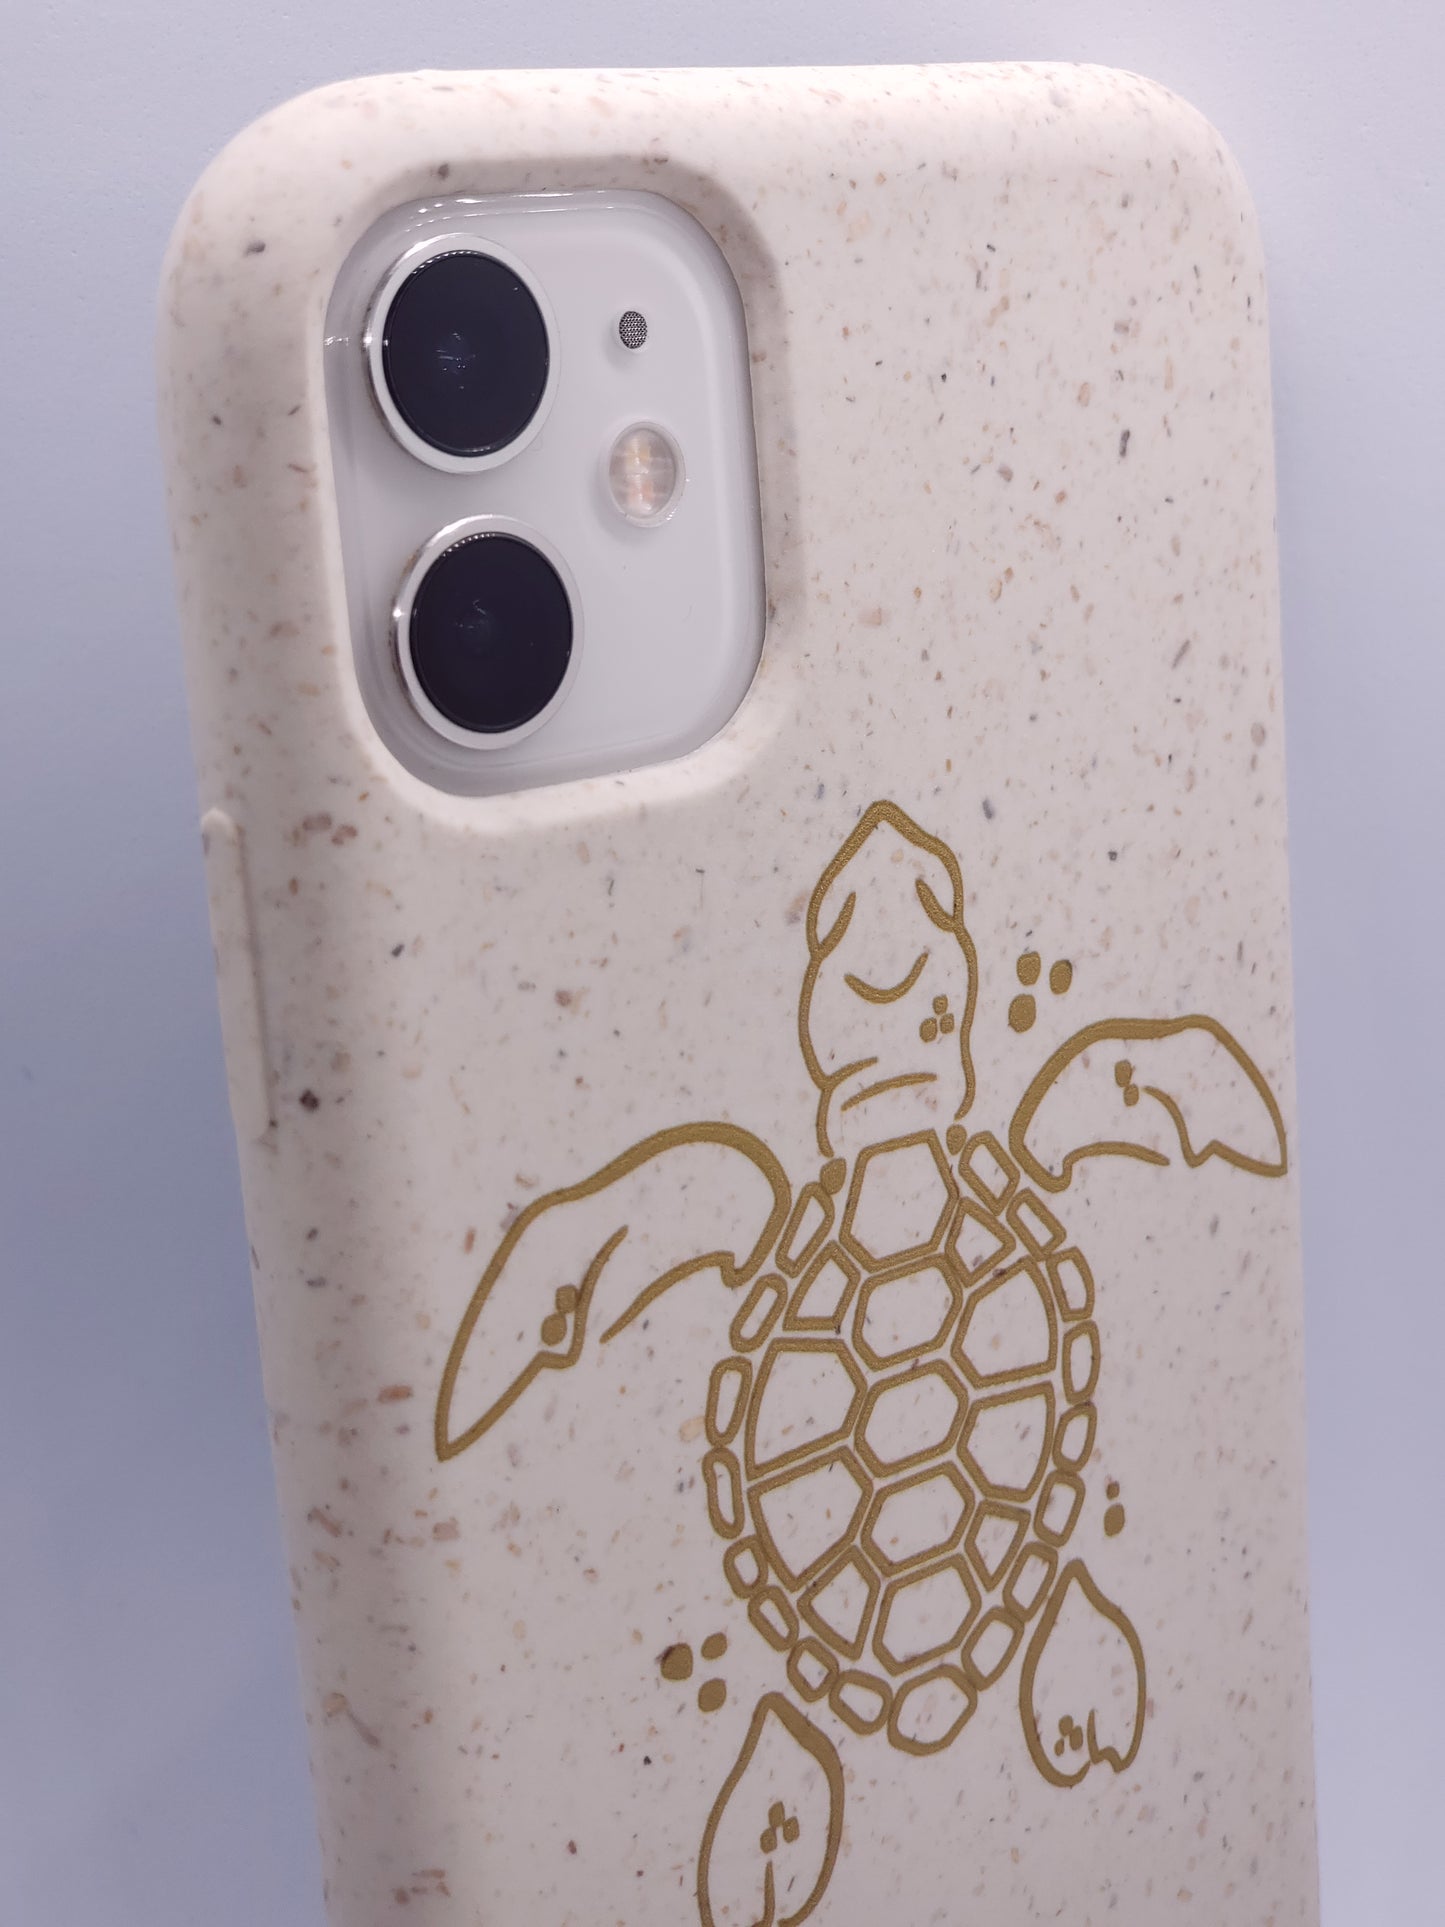 Ocean Turtle Biodegradable Compostable iPhone Case